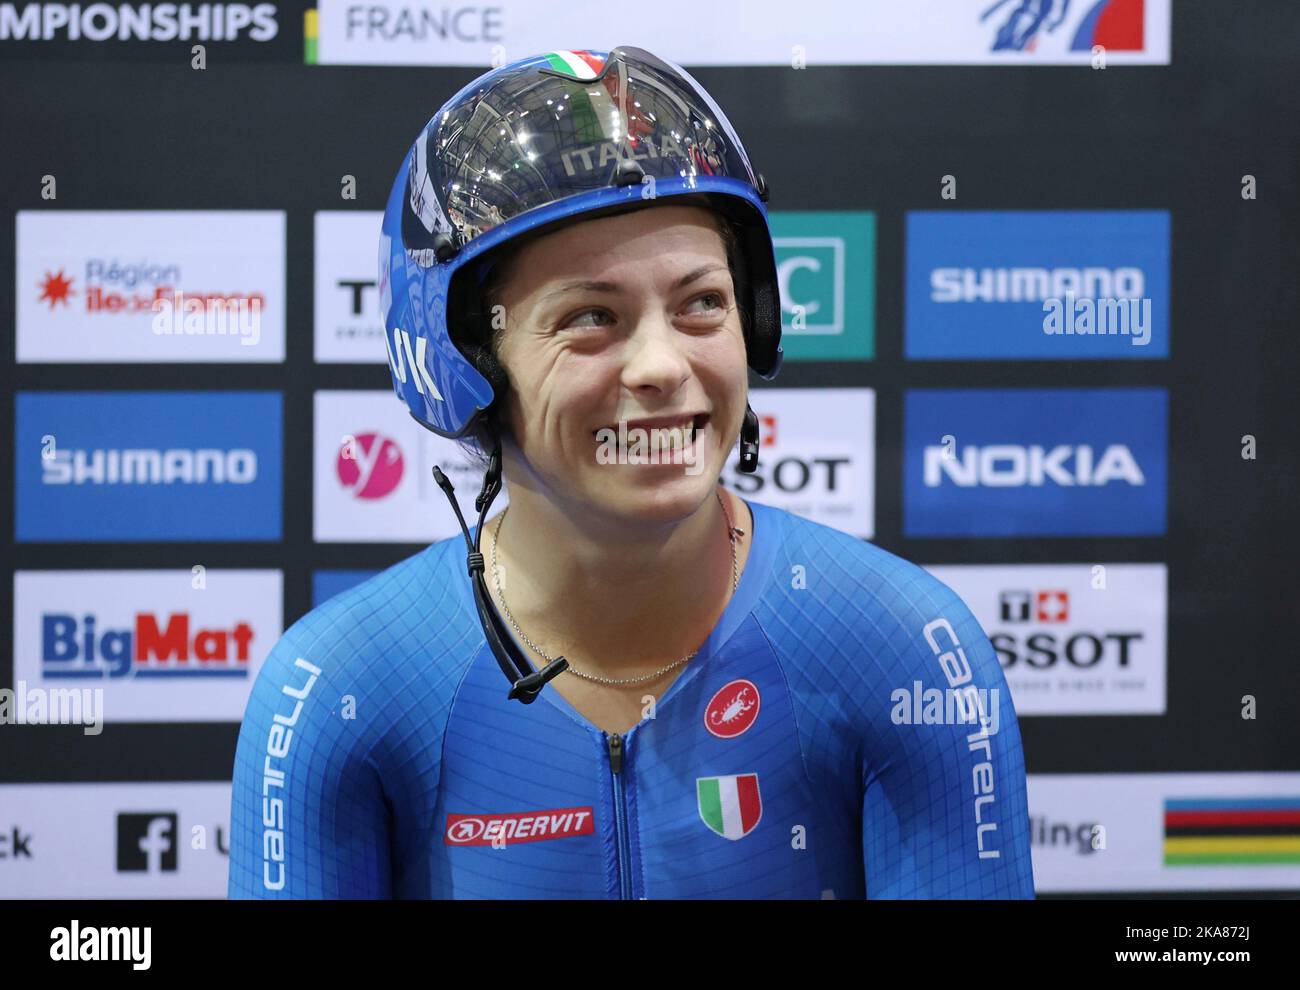 Miriam Vece from Italy at the 2022 UCI Track Cycling World Championships in Saint-Quentin-en-Yvelines (France). Stock Photo